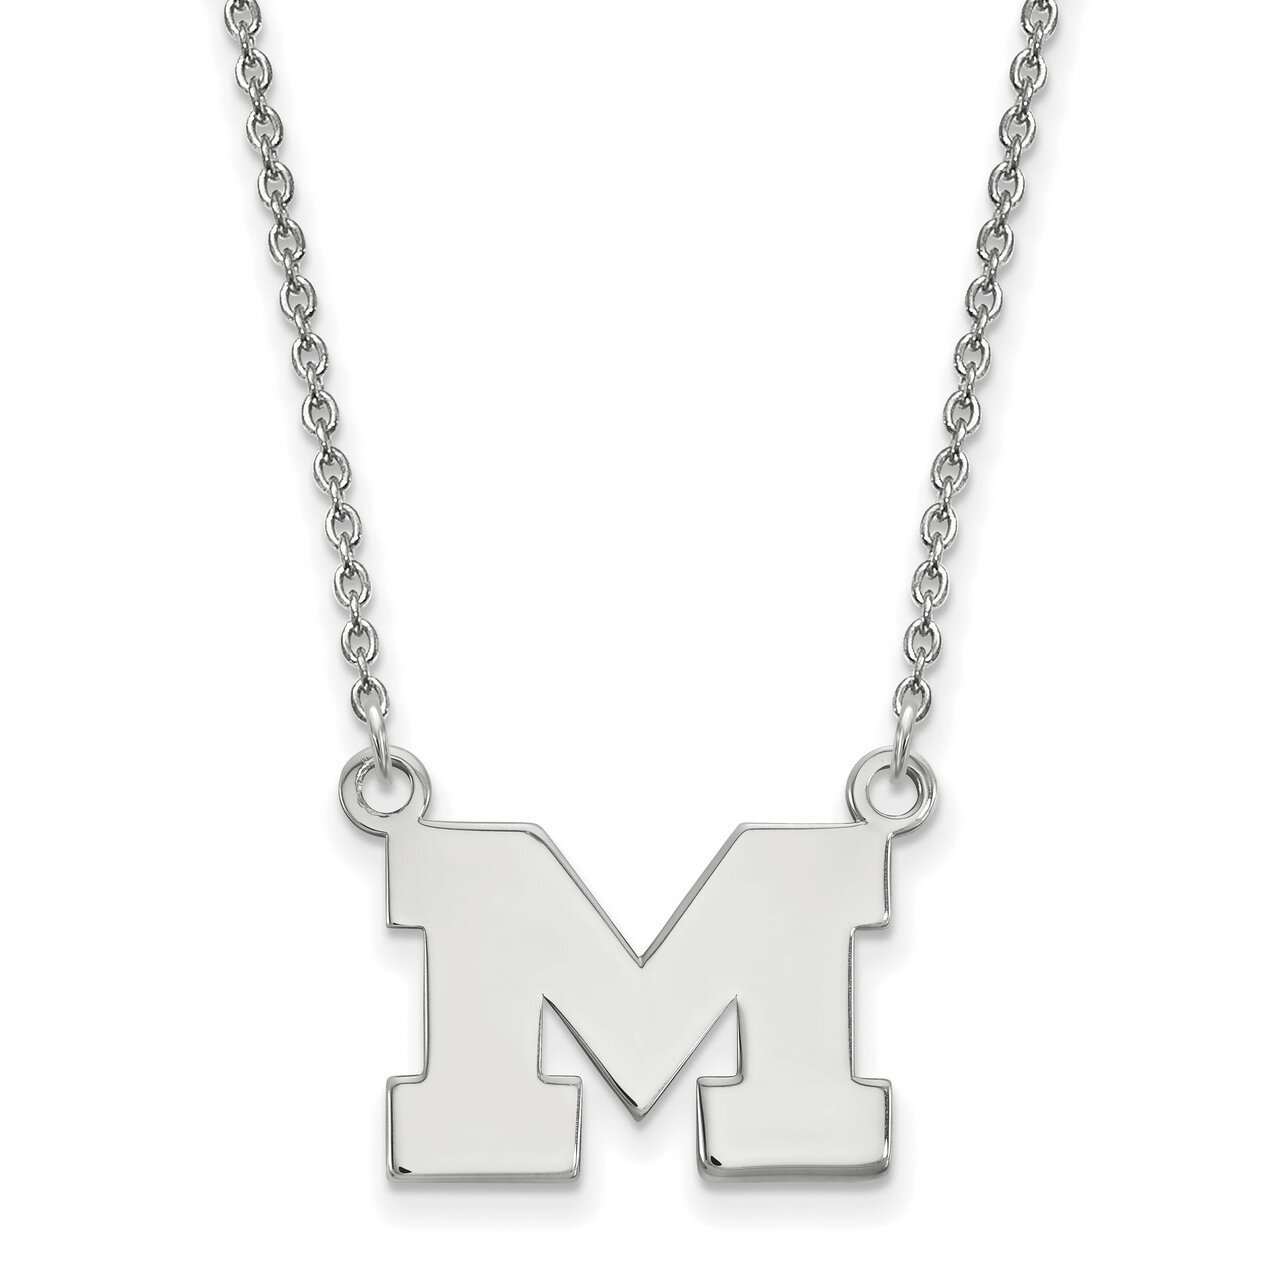 Michigan University of Small Pendant with Necklace Sterling Silver SS015UM-18